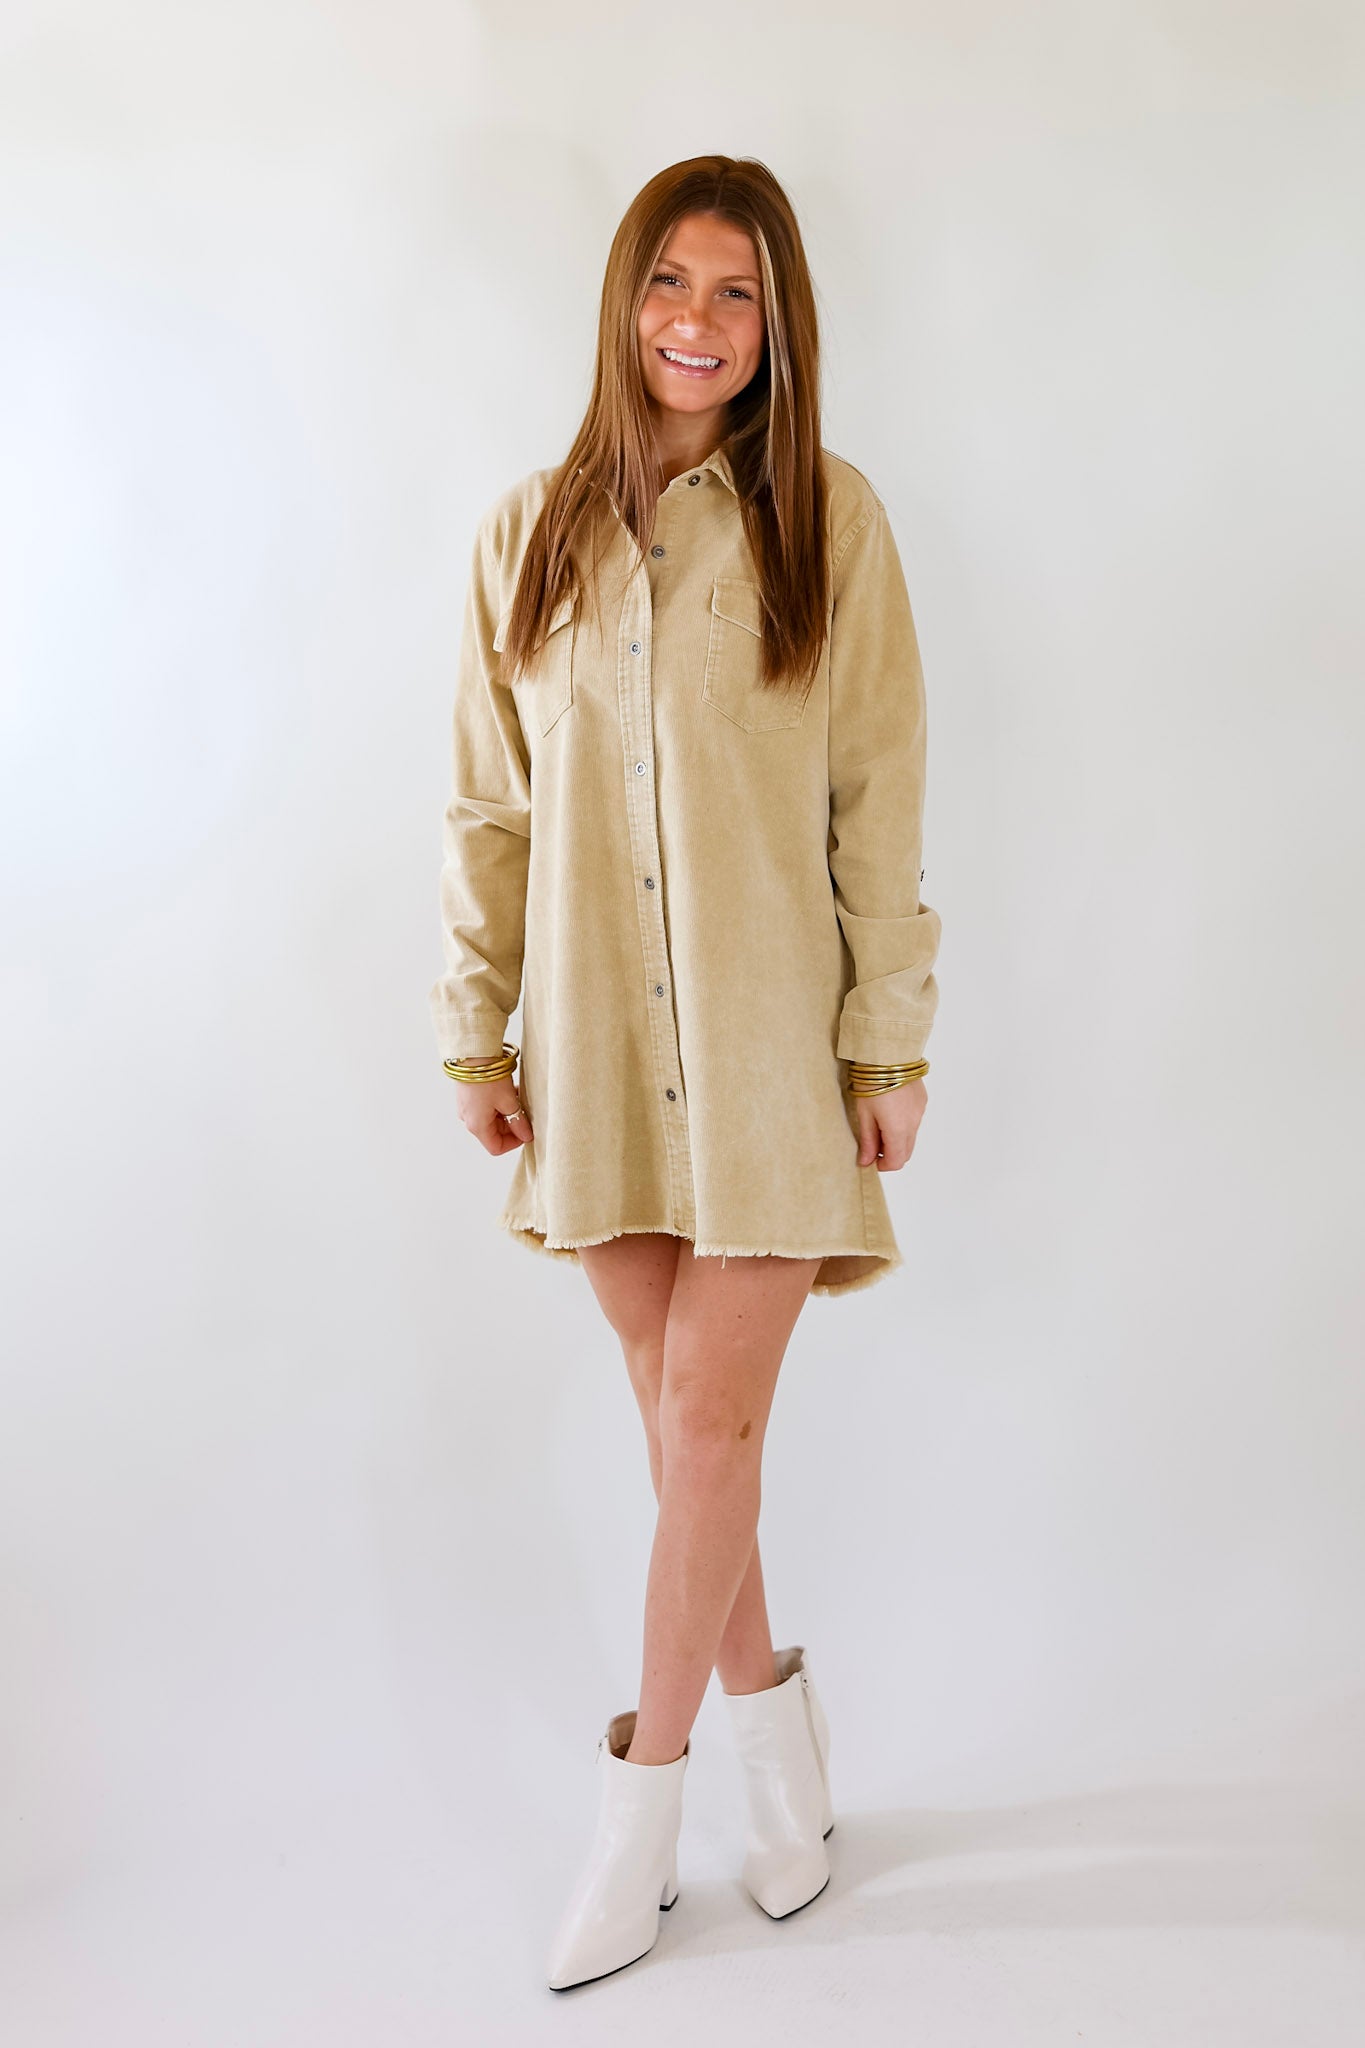 Patio Date Button Up Long Sleeve Corduroy Dress in Tan - Giddy Up Glamour Boutique